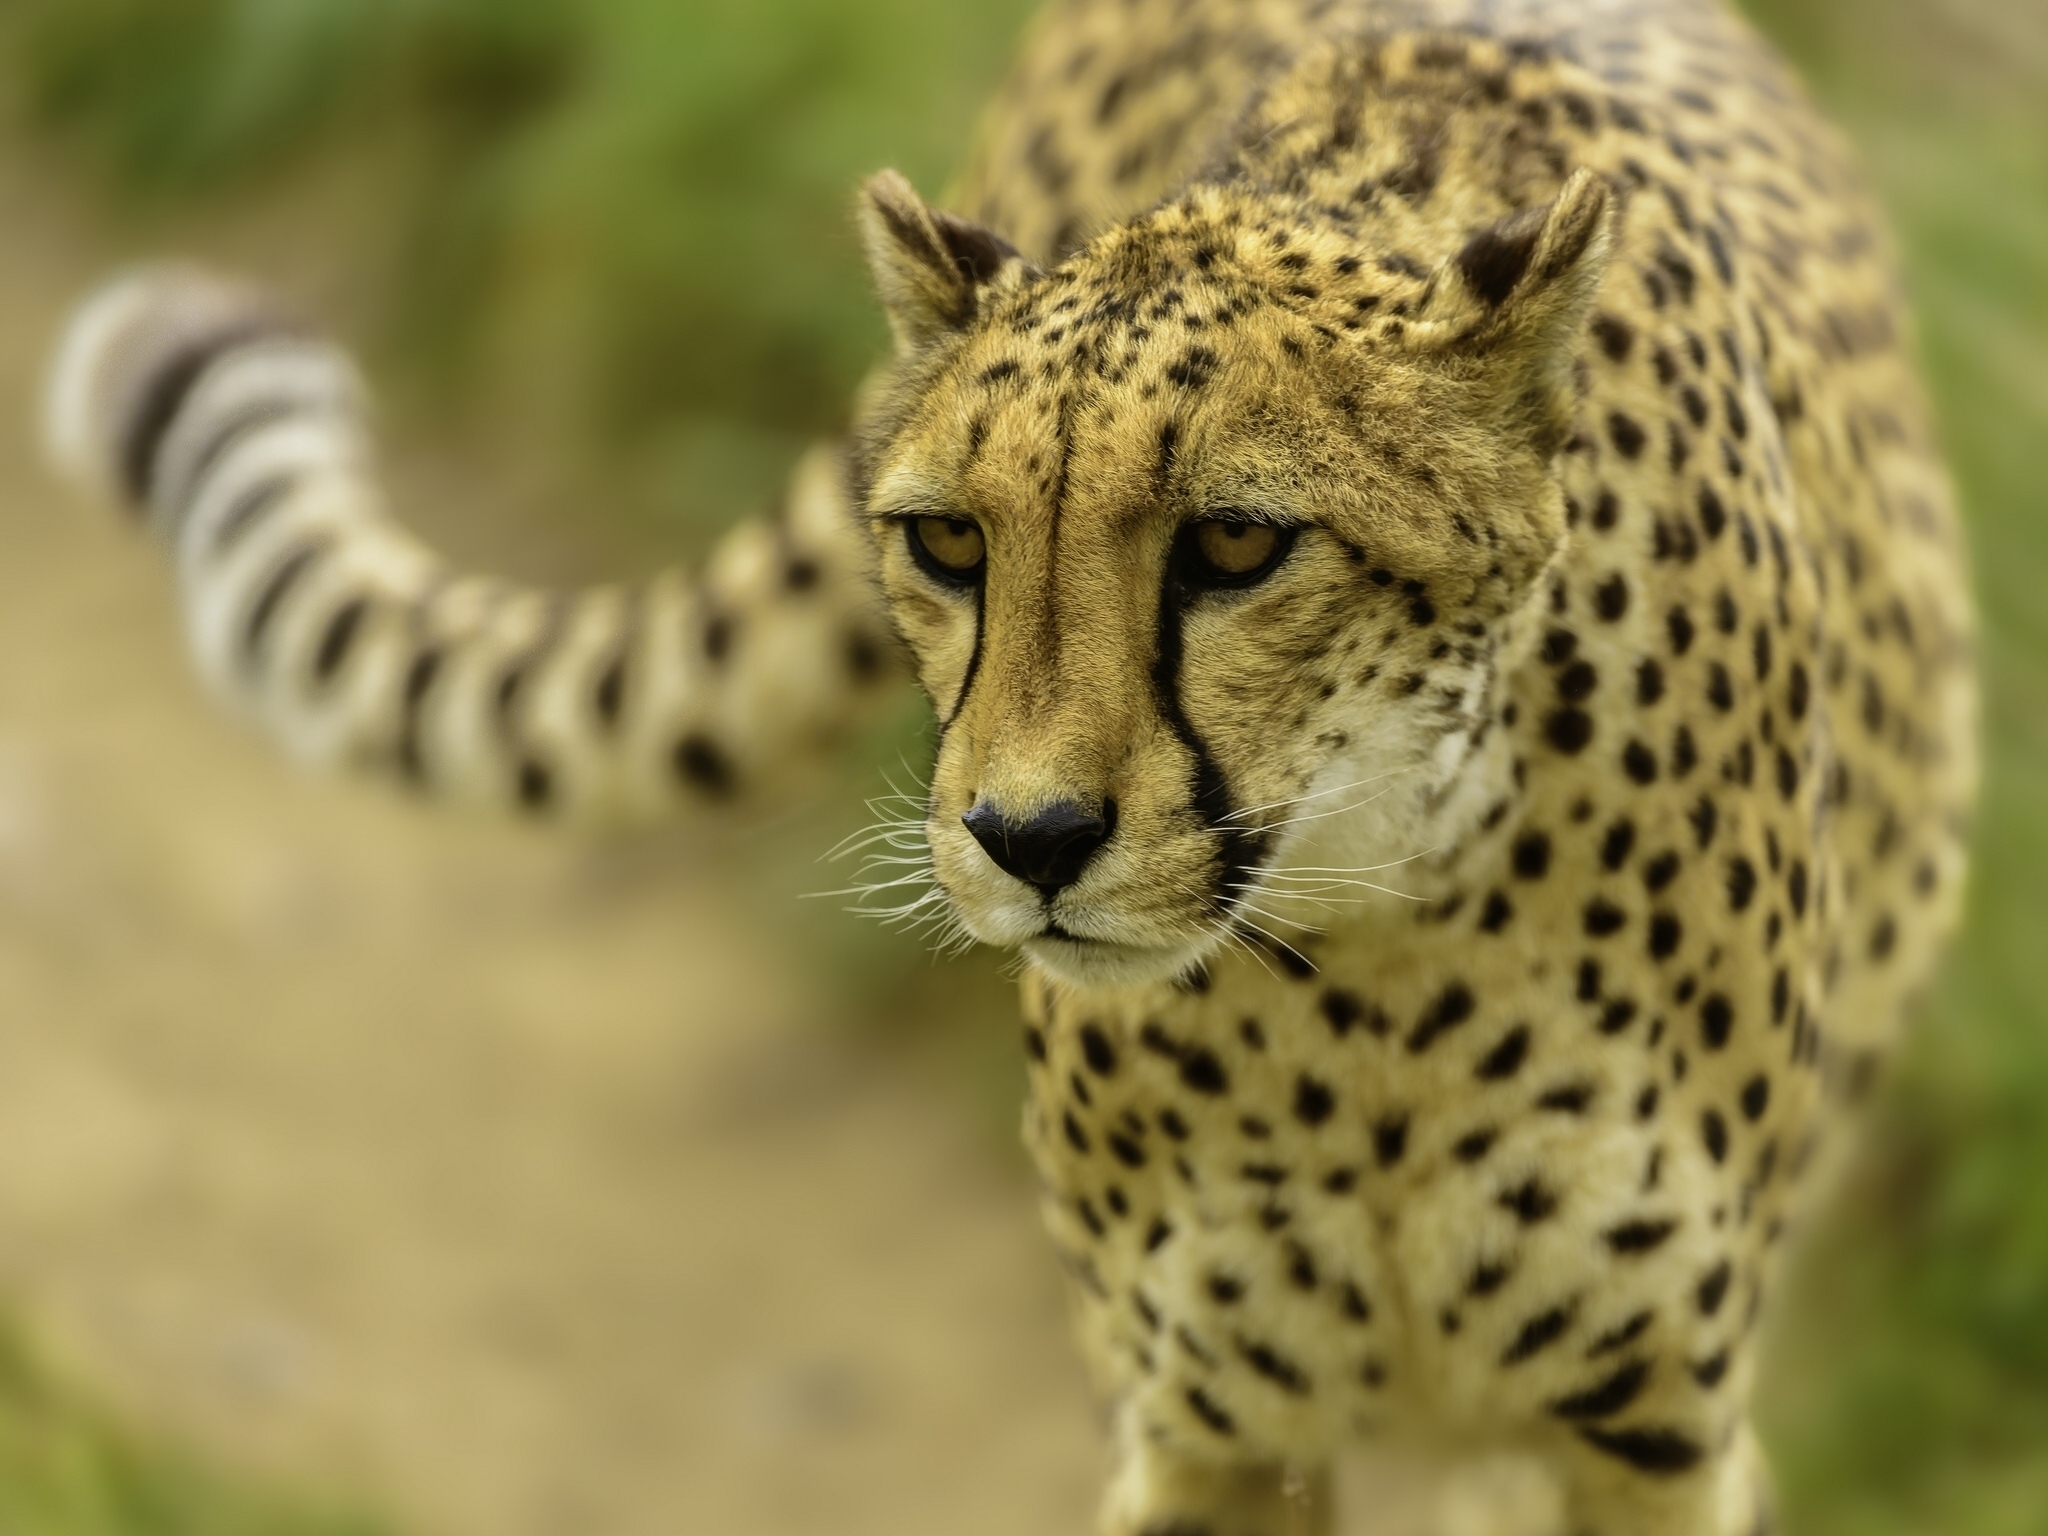 139082 download wallpaper animals, cheetah, muzzle, blur, smooth screensavers and pictures for free